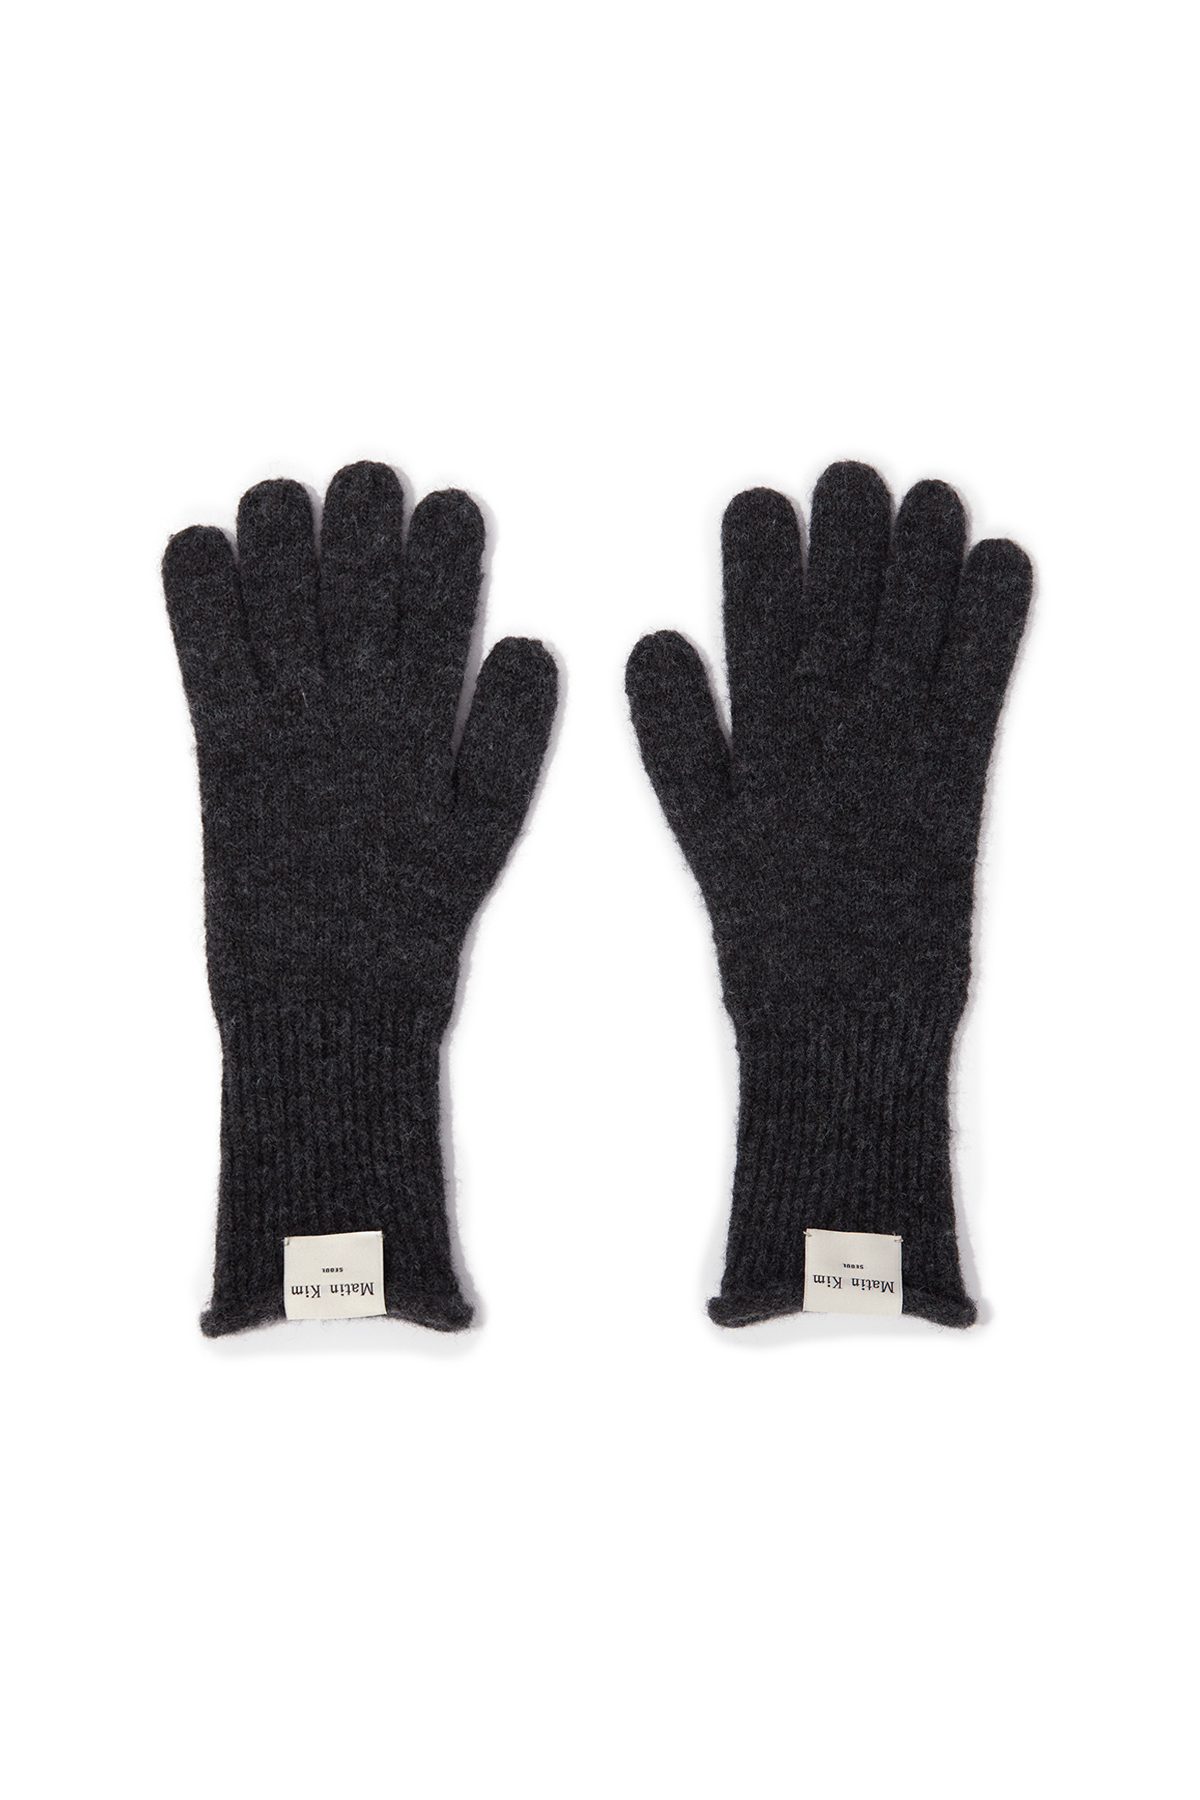 FINGER HOLE KNIT GLOVES IN CHARCOAL